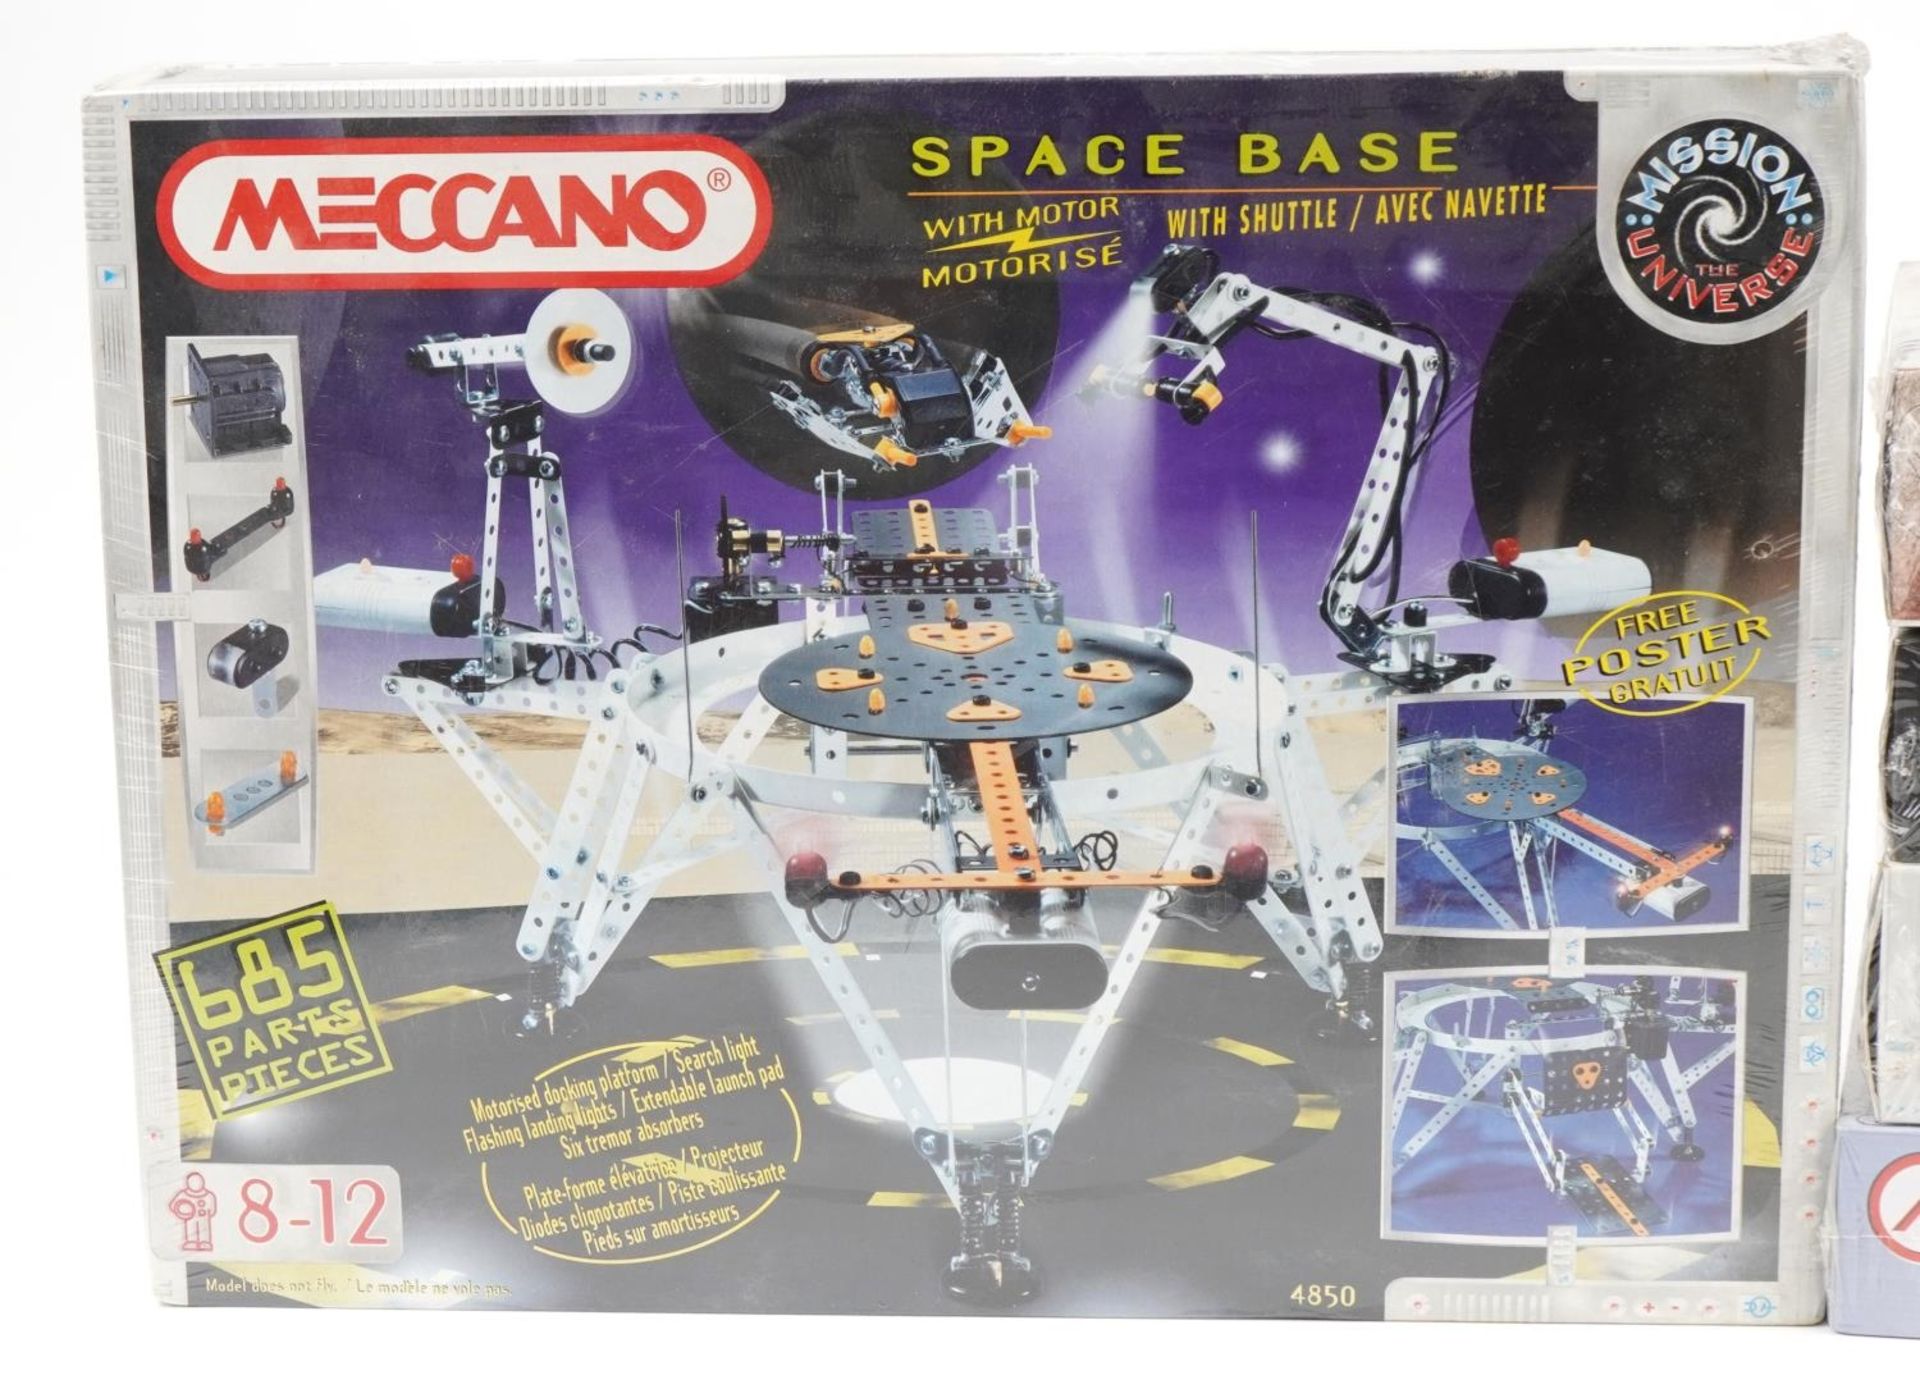 Ten as new Meccano construction sets including numbers 0050, 4840, 4850 and 5650 : For further - Image 2 of 4